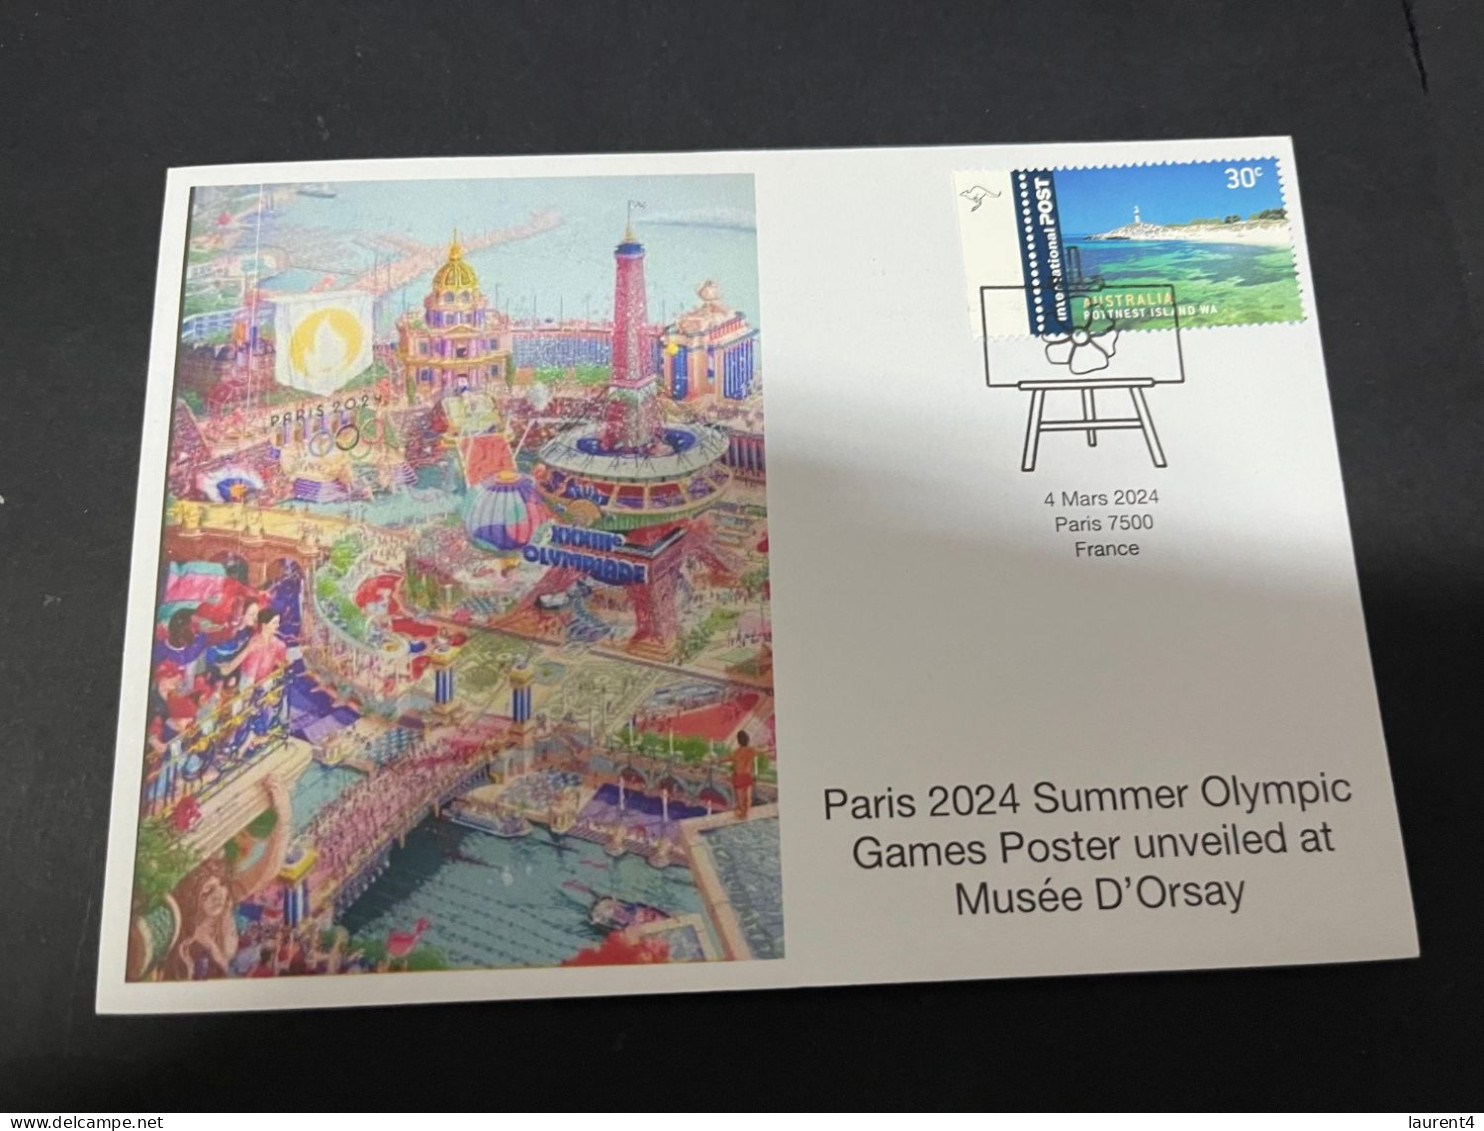 6-3-2024 (2 Y 17) Paris Olympic Games 2024 - 2 Olympic Games Posters Unveil At Musée D'Orsay (2 Covers) - Sommer 2024: Paris